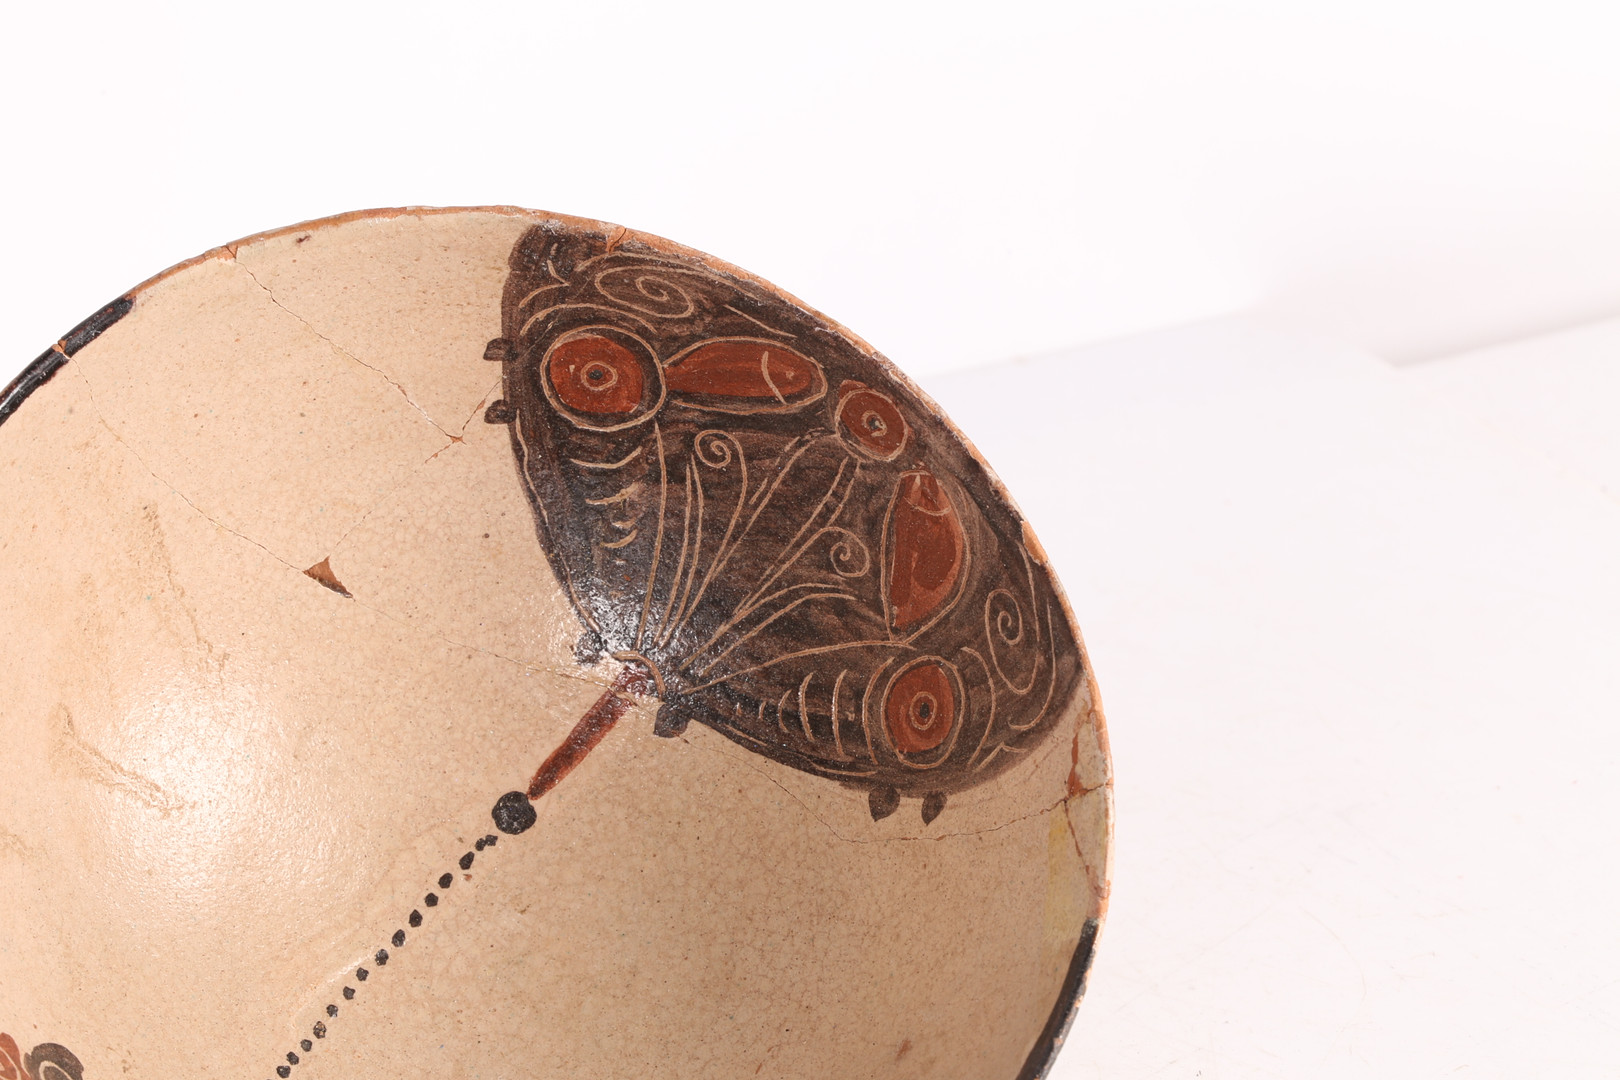 A SAMANID SLIP PAINTED POTTERY SPOUTED BOWL, 10TH CENTURY AD, PERSIA. - Image 2 of 8